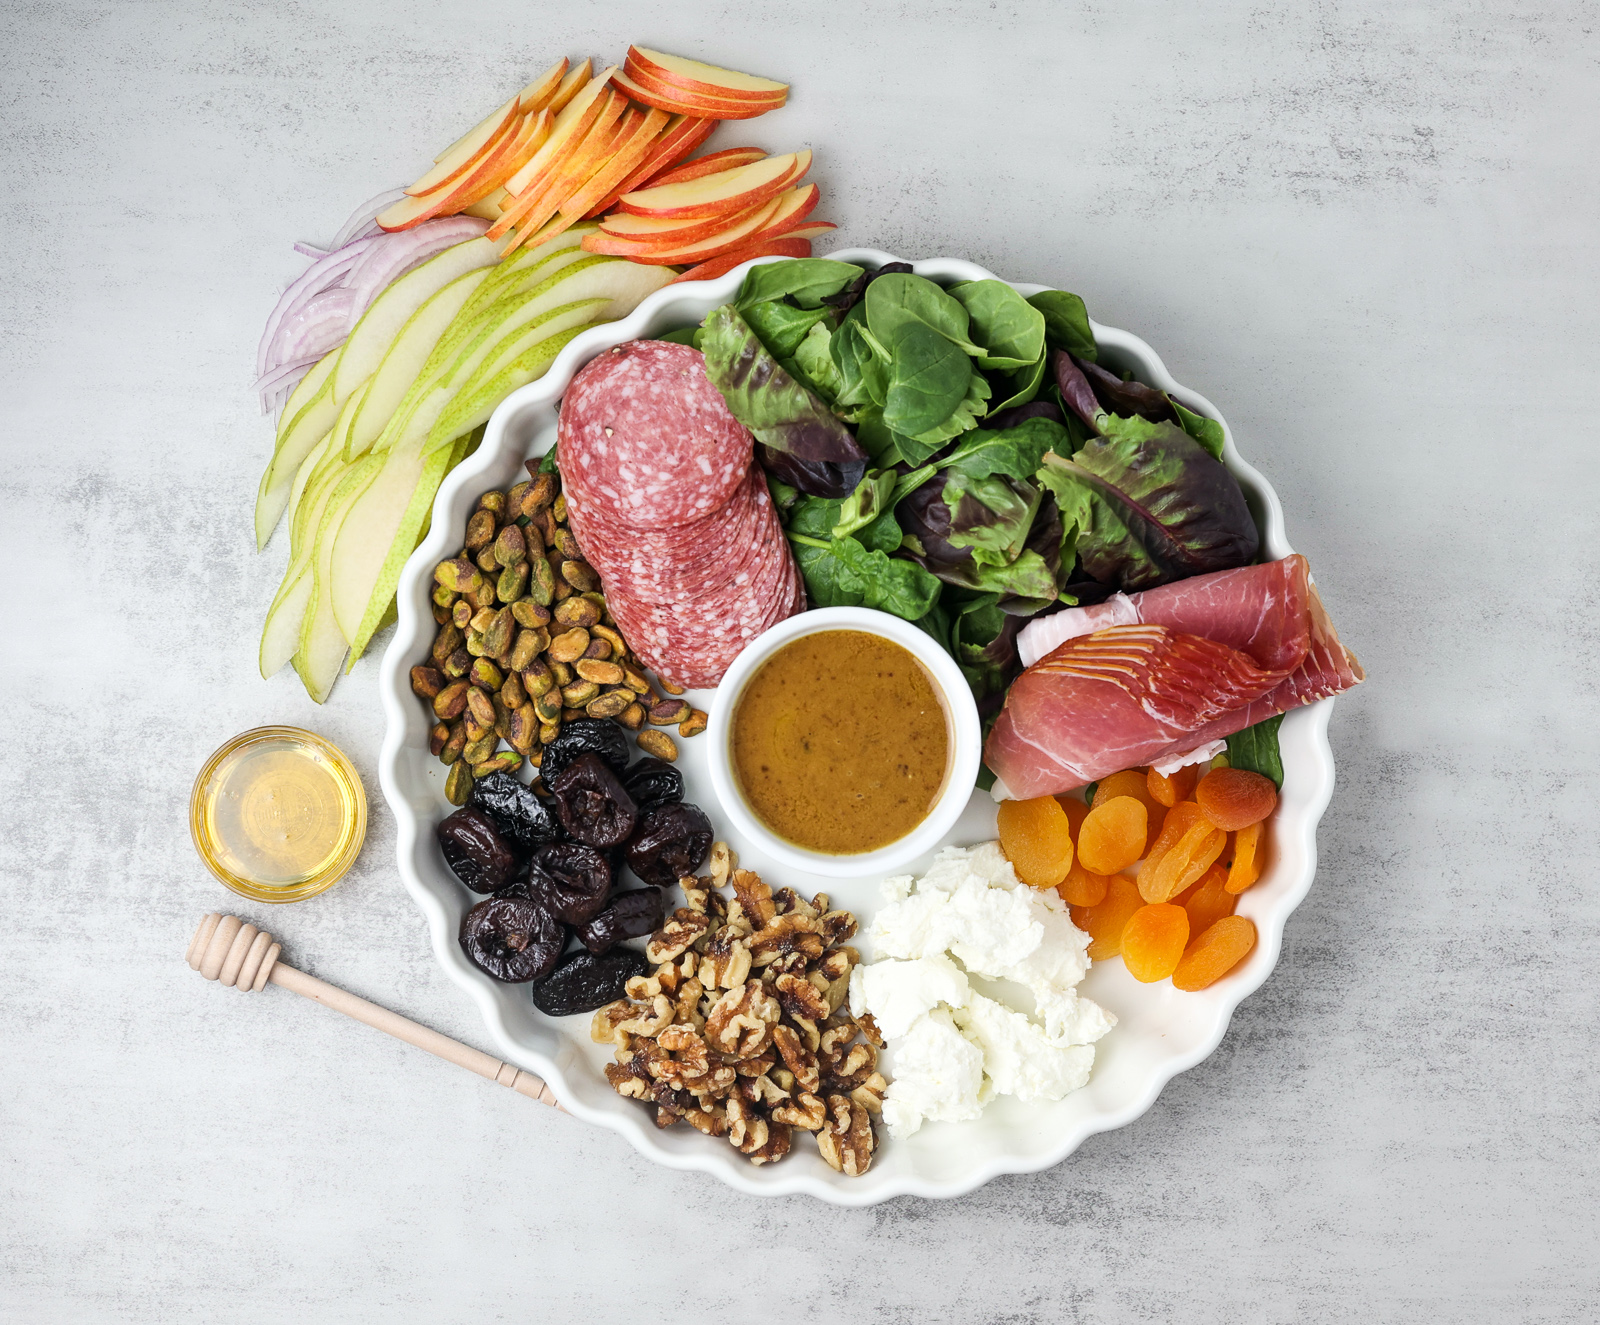 Styled charcuterie salad